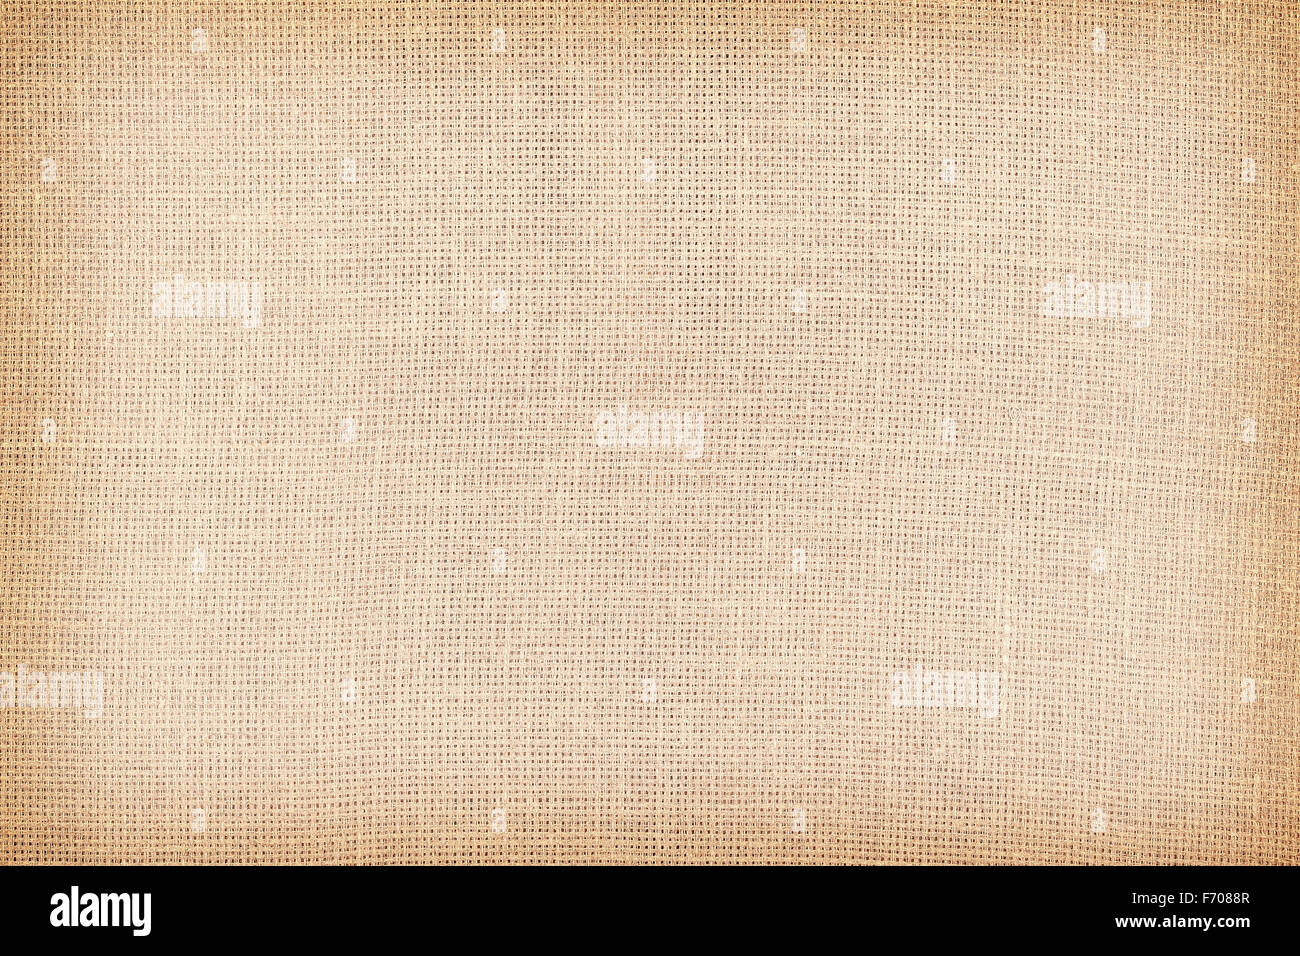 Retro toned natural linen texture or background. Stock Photo